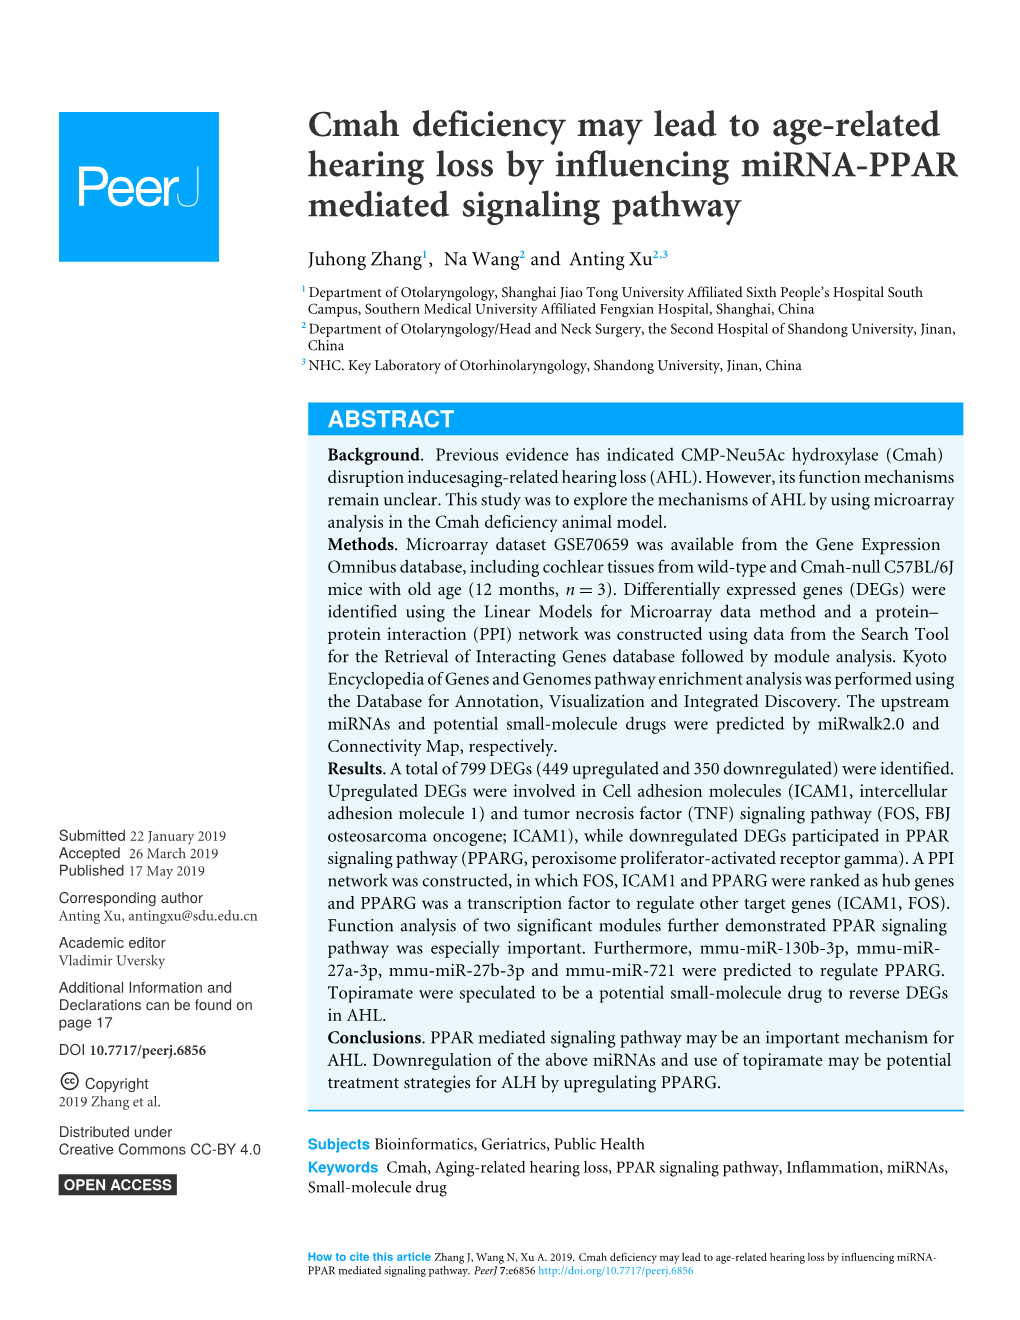 Cmah Deficiency May Lead to Age-Related Hearing Loss by Influencing Mirna-PPAR Mediated Signaling Pathway